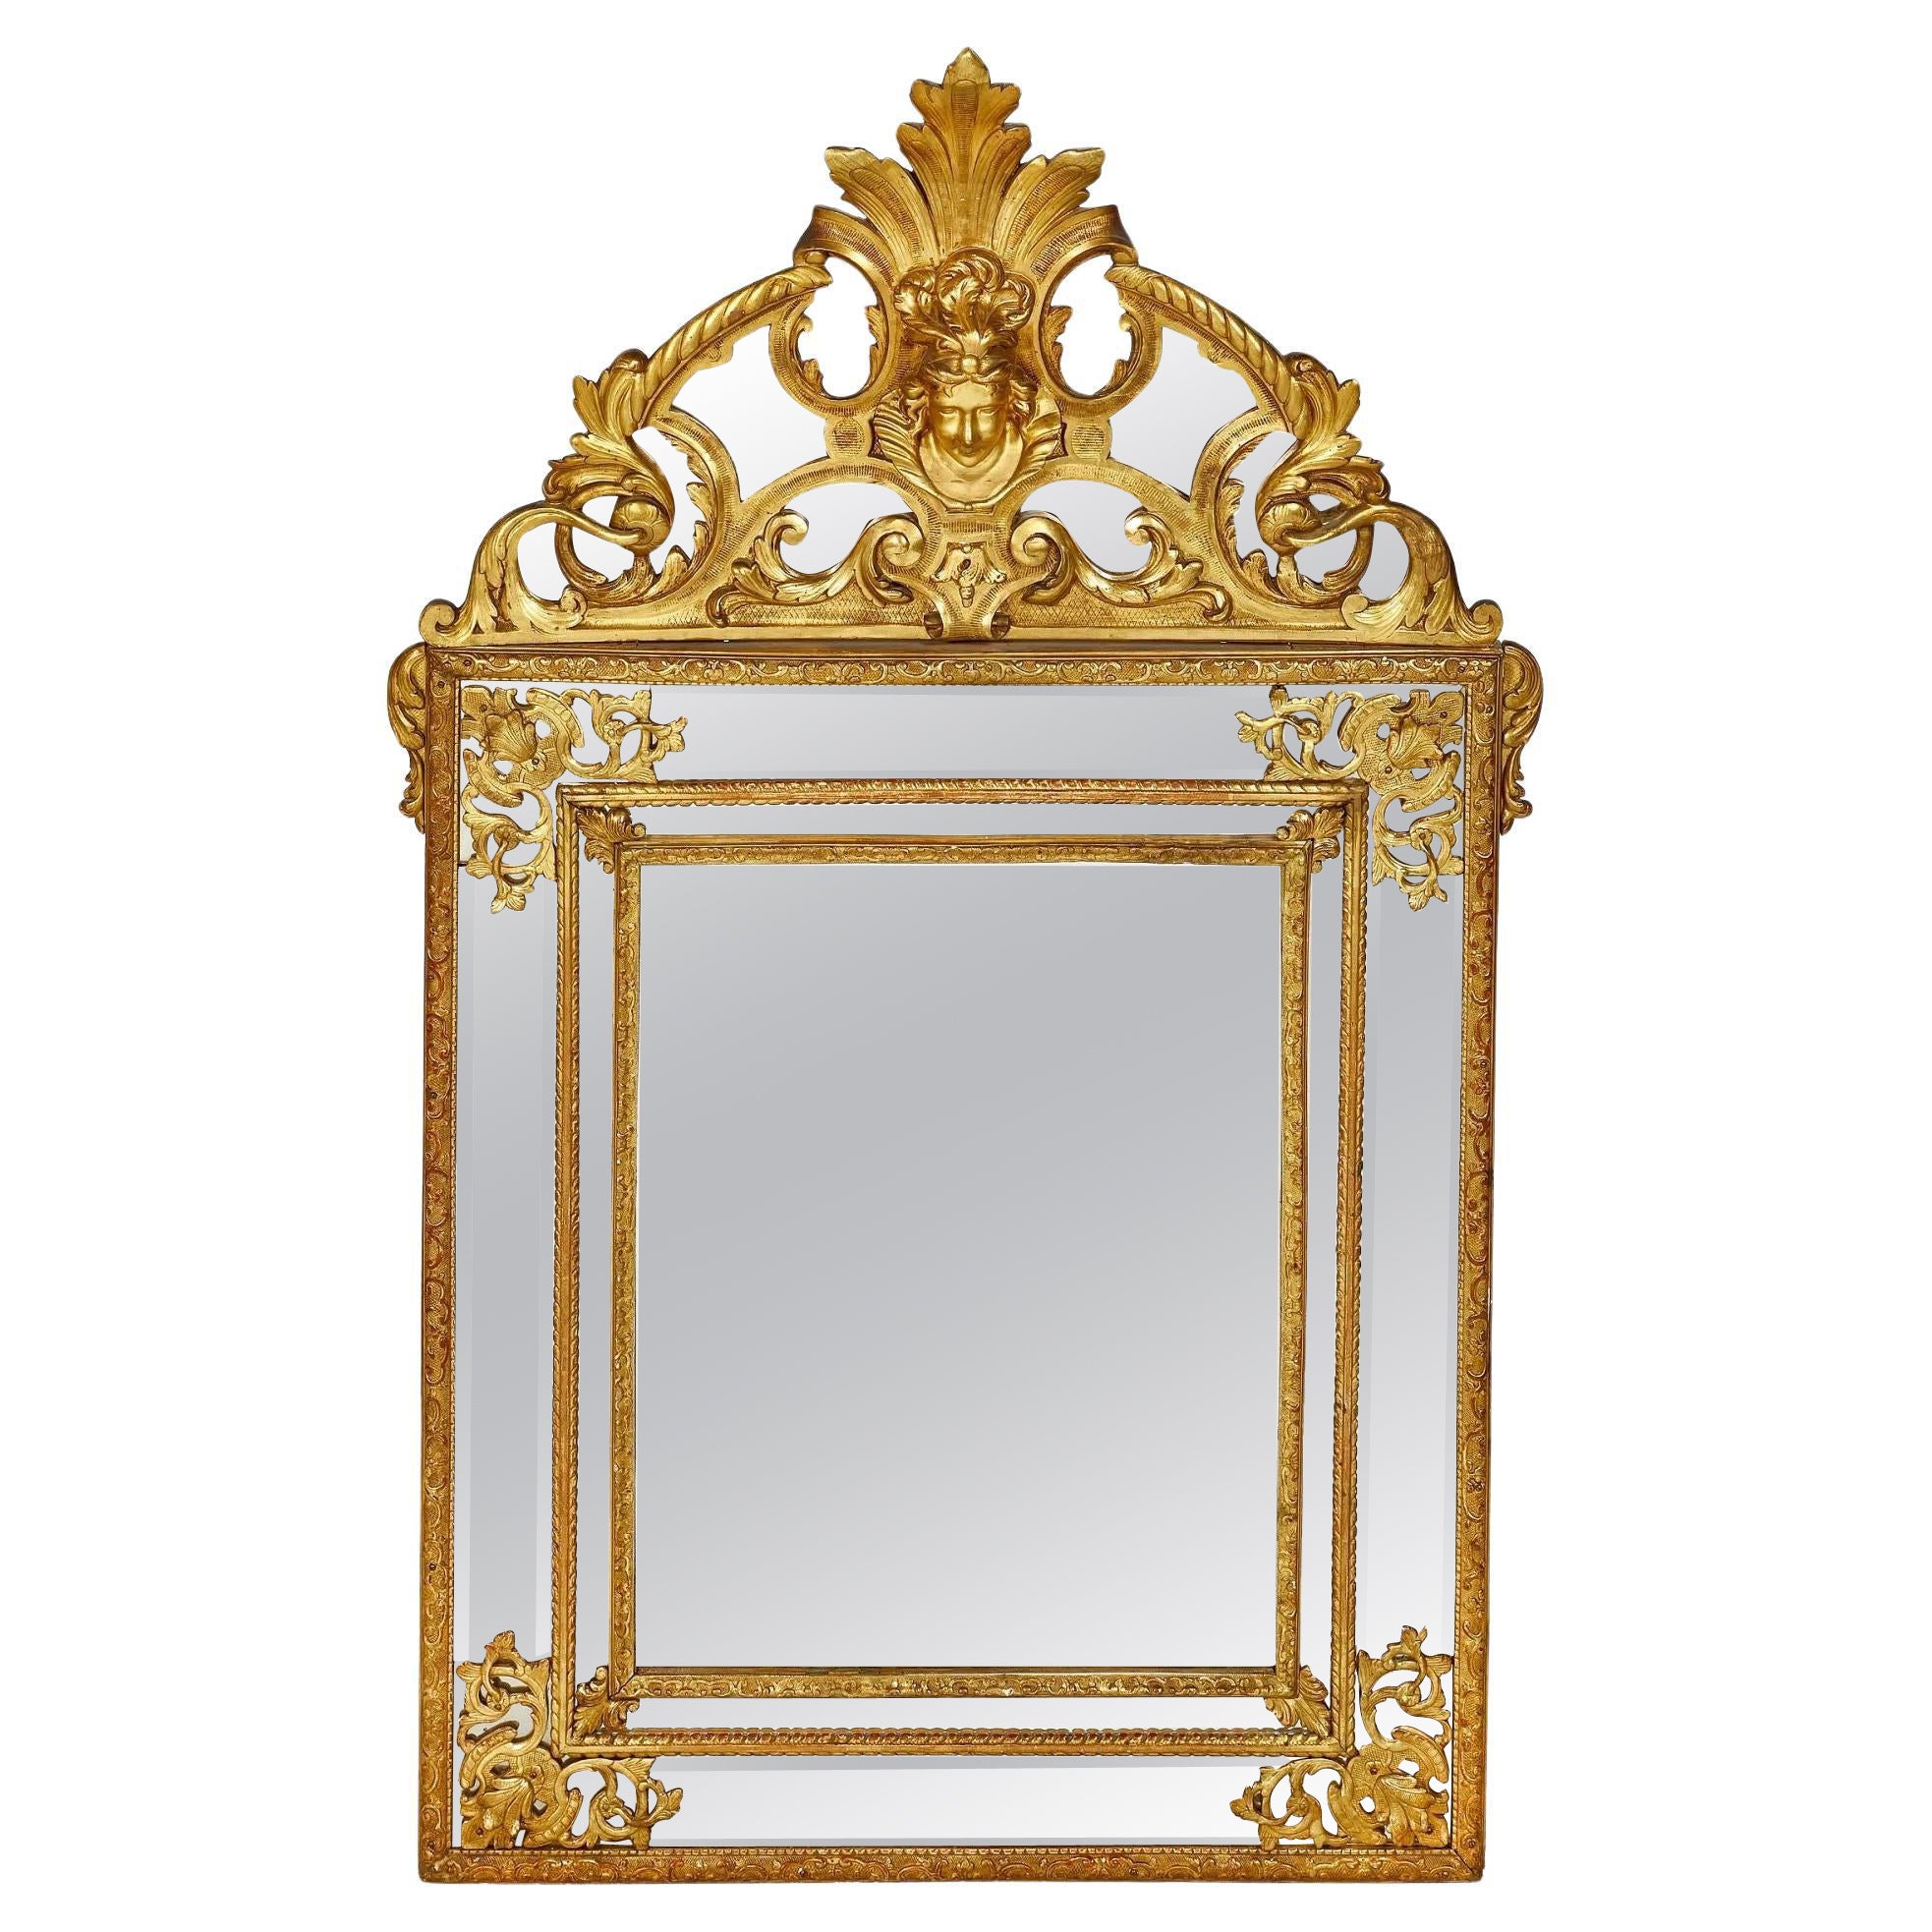 19th Century English Regency Style Carved Giltwood Mirror For Sale